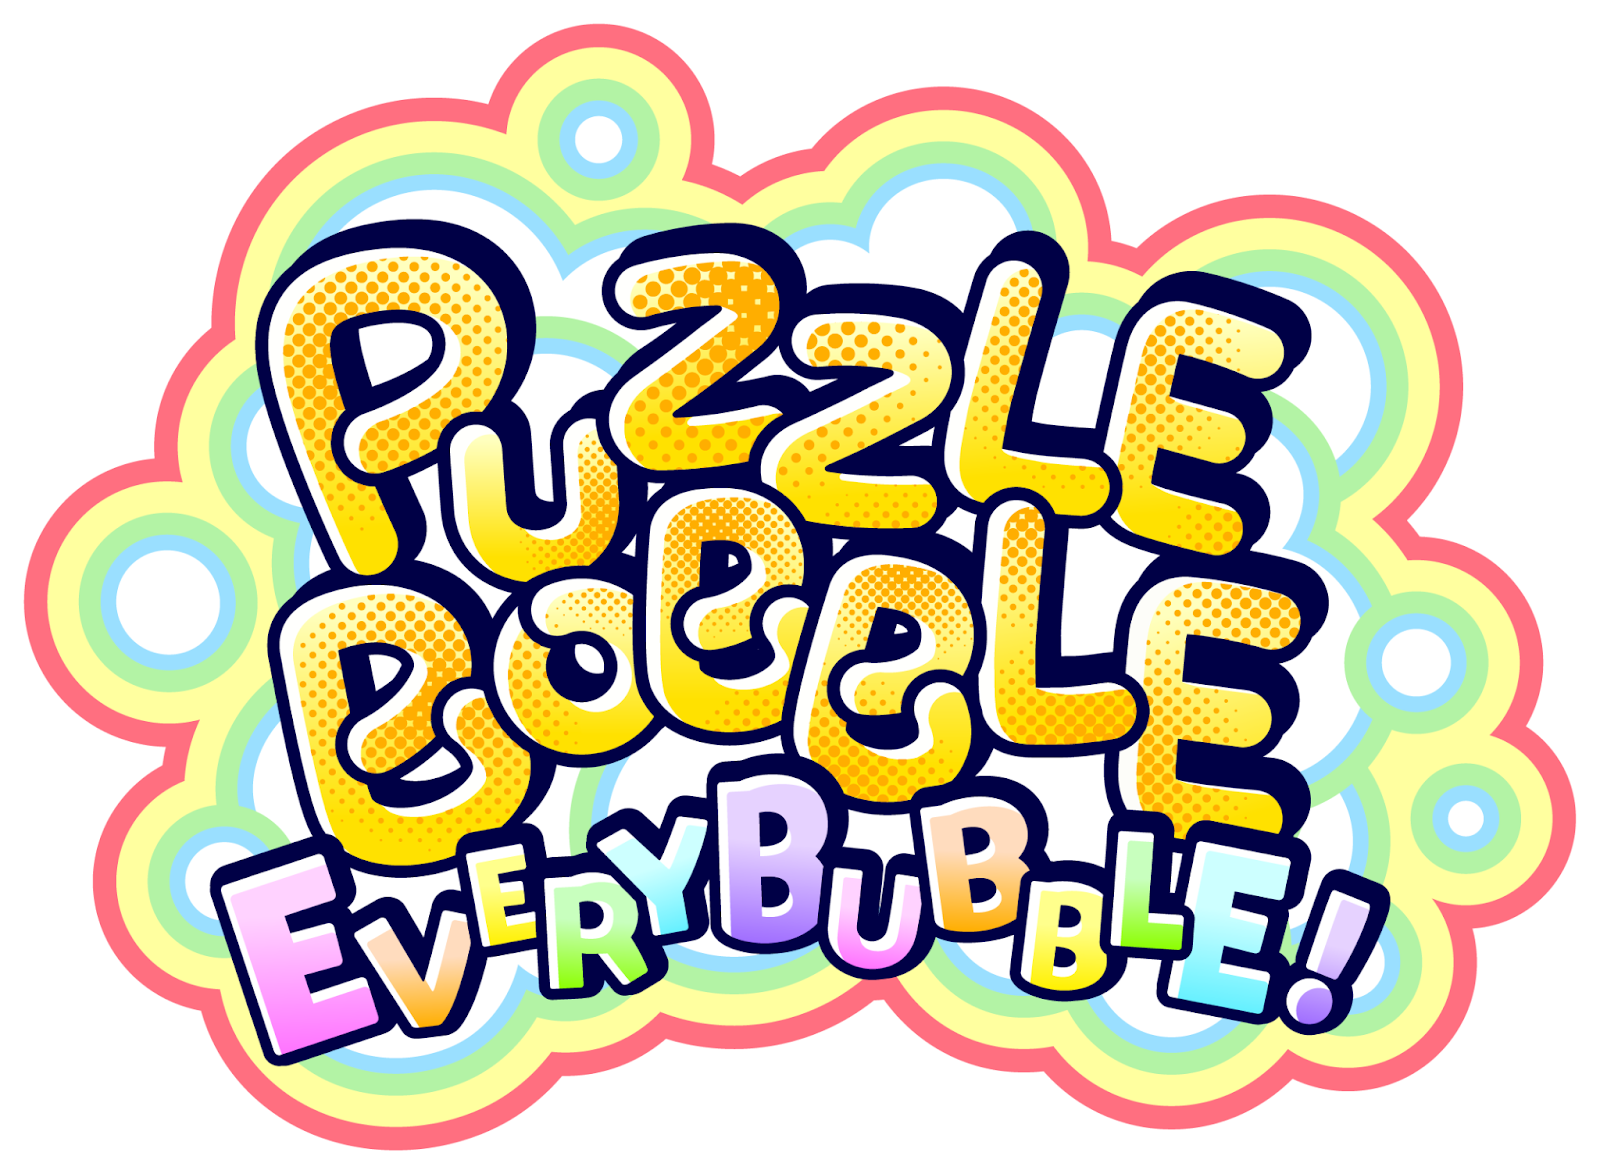 Official game logo featuring colourful lettering and bubbles.